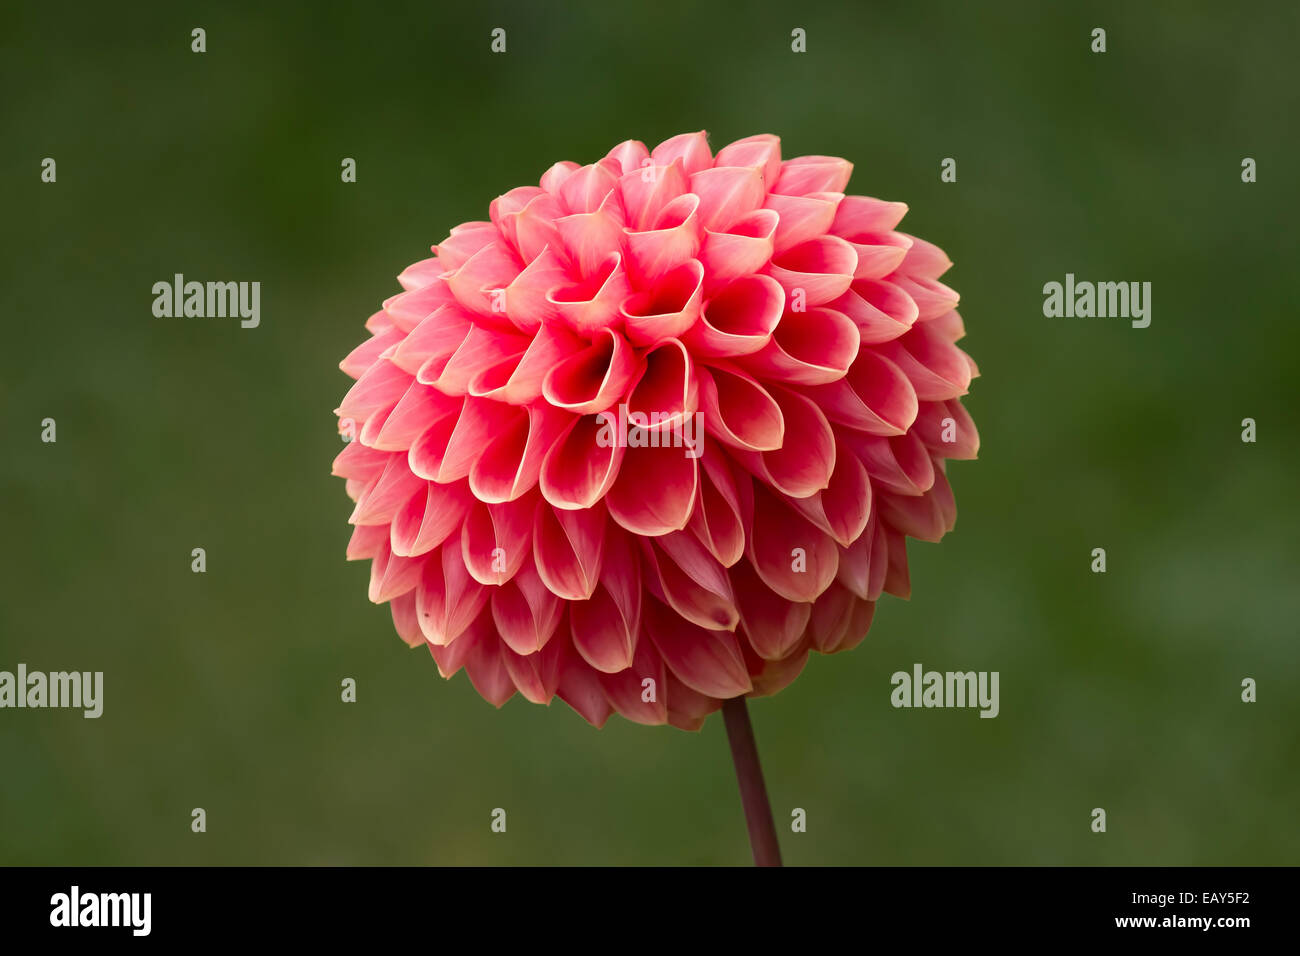 Single flower bloom of a Dahlia. Close up and detailed against a plain natural green background Stock Photo